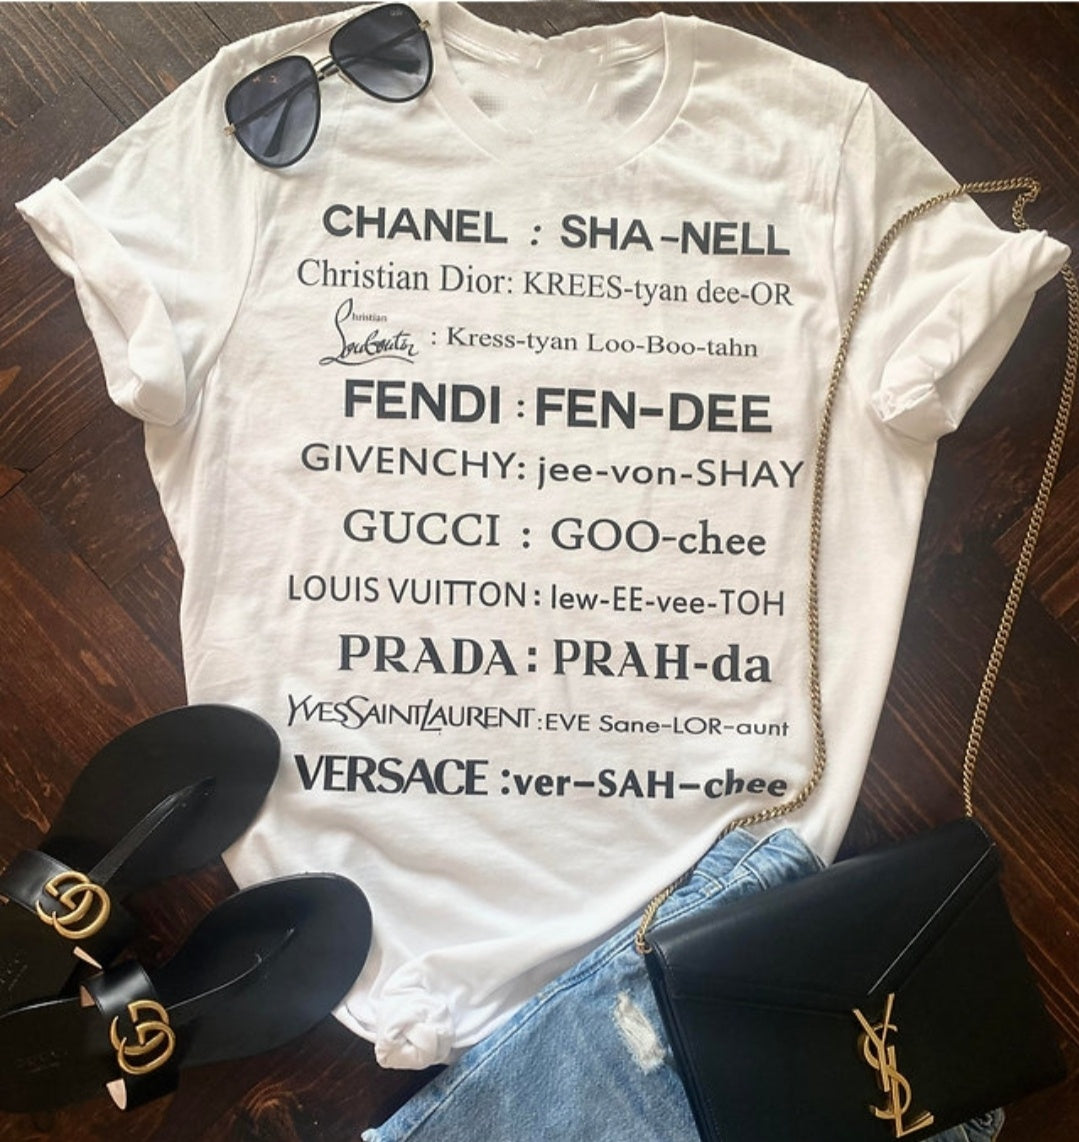 Gucci, Chanel, Fendi and Givenchy